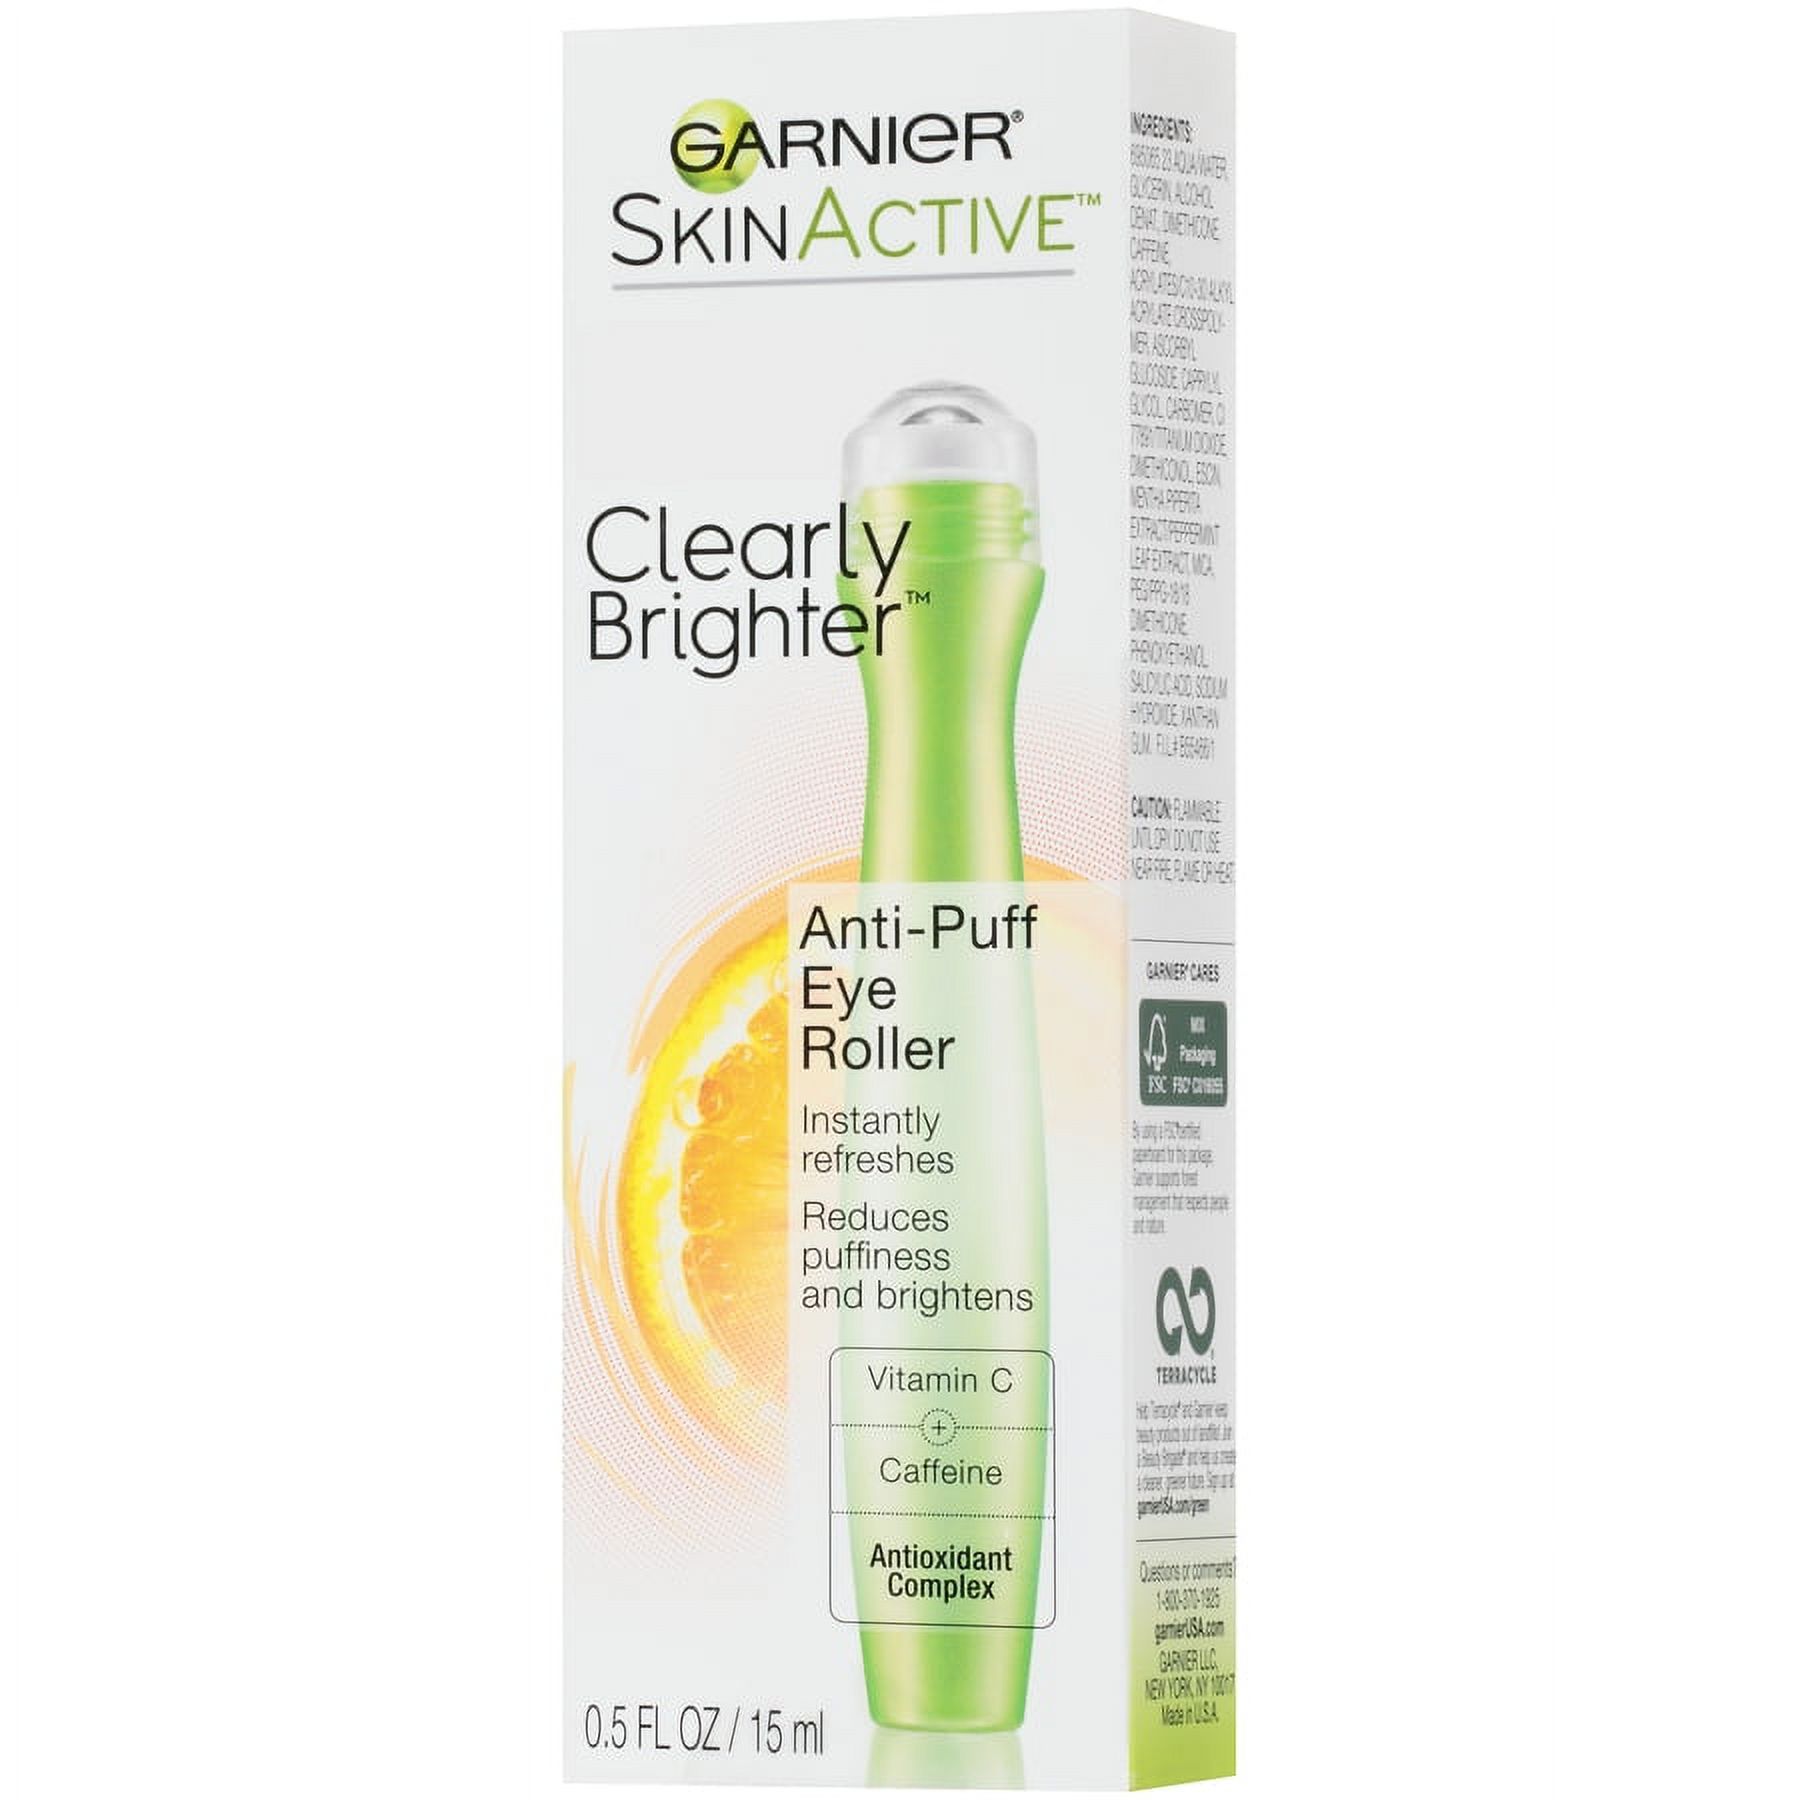 Garnier SkinActive Clearly Brighter Anti Puff Eye Roller, 0.5 fl oz - image 4 of 9